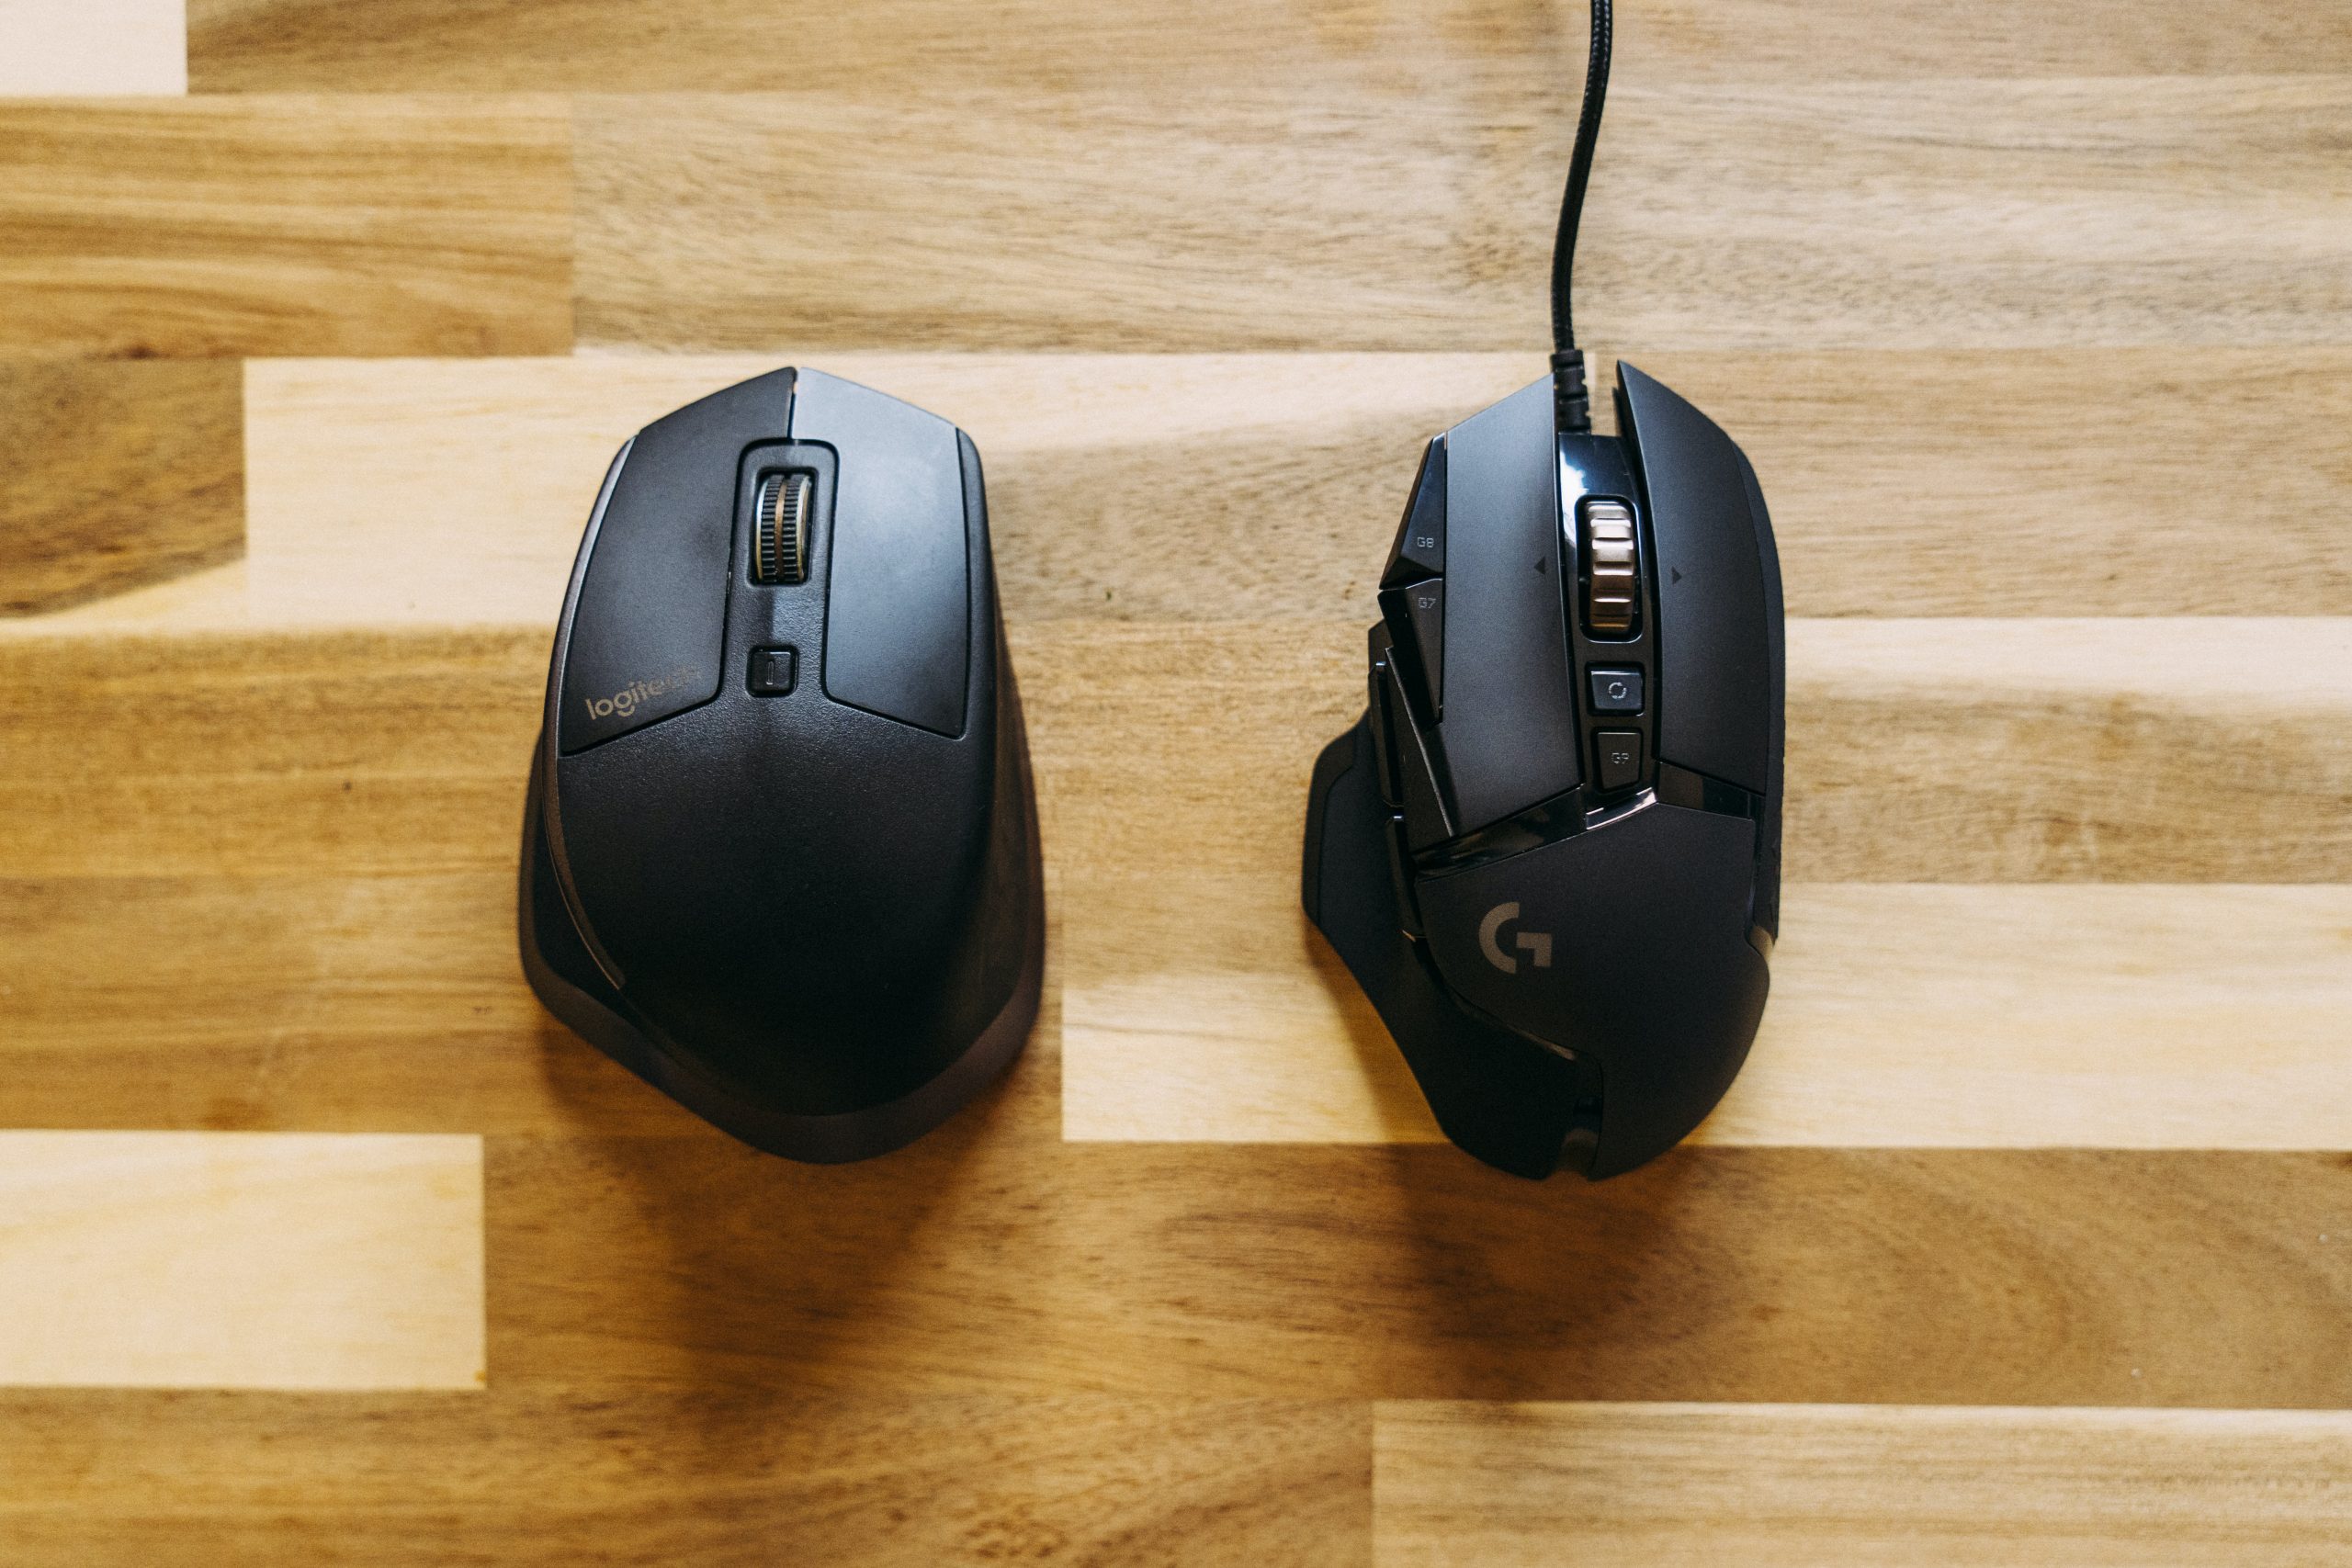 tricks to use the mouse without ending up injuring yourself